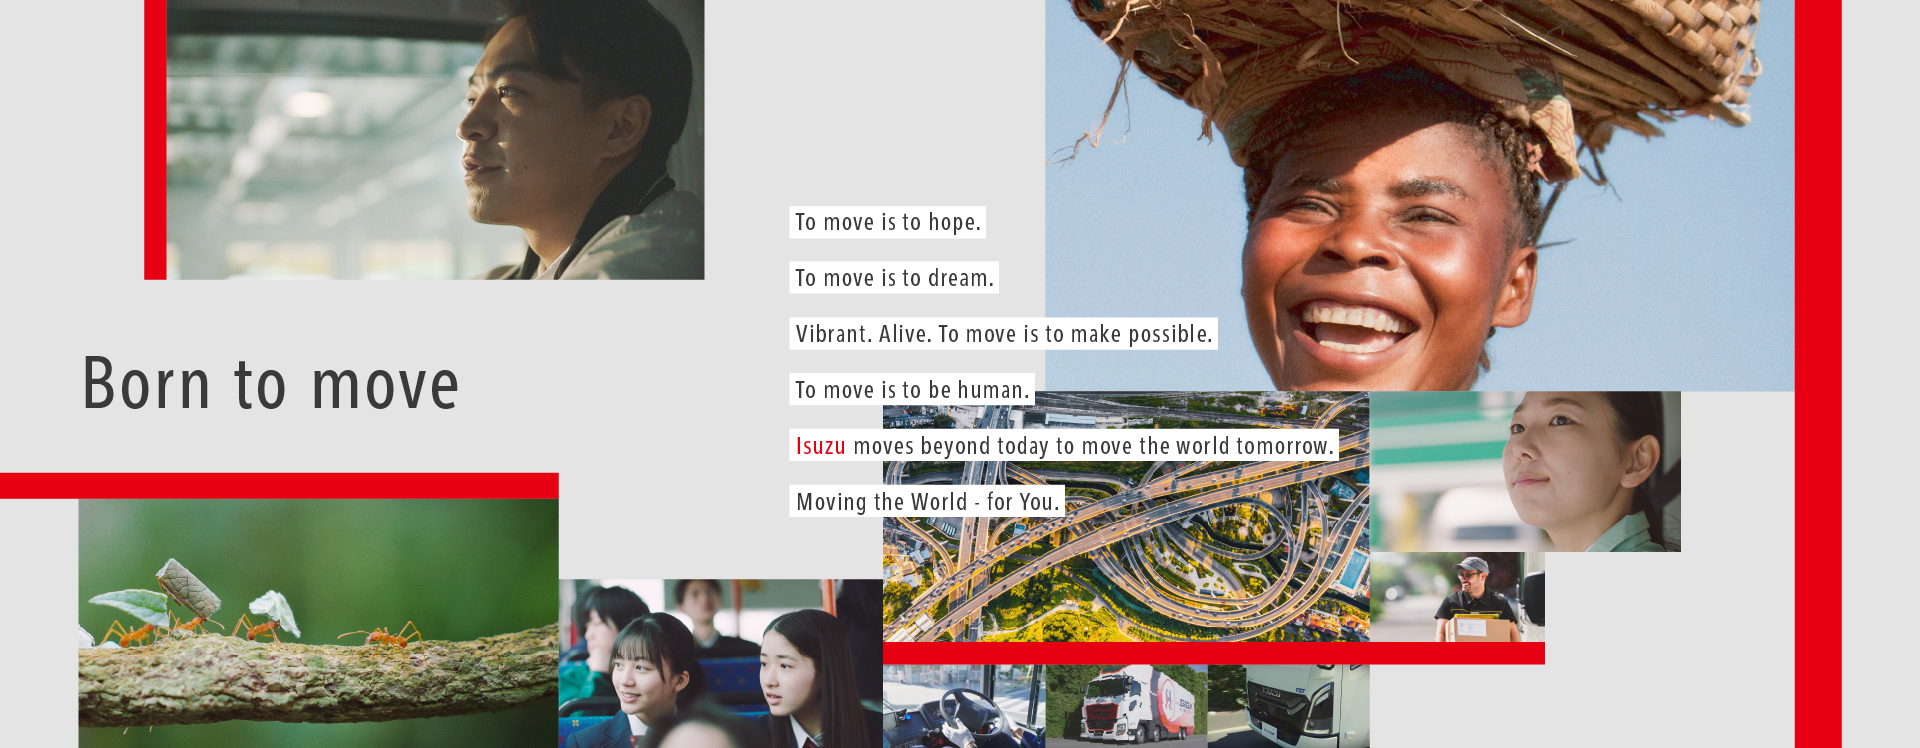 ISUZU ”Moving the World – for You”